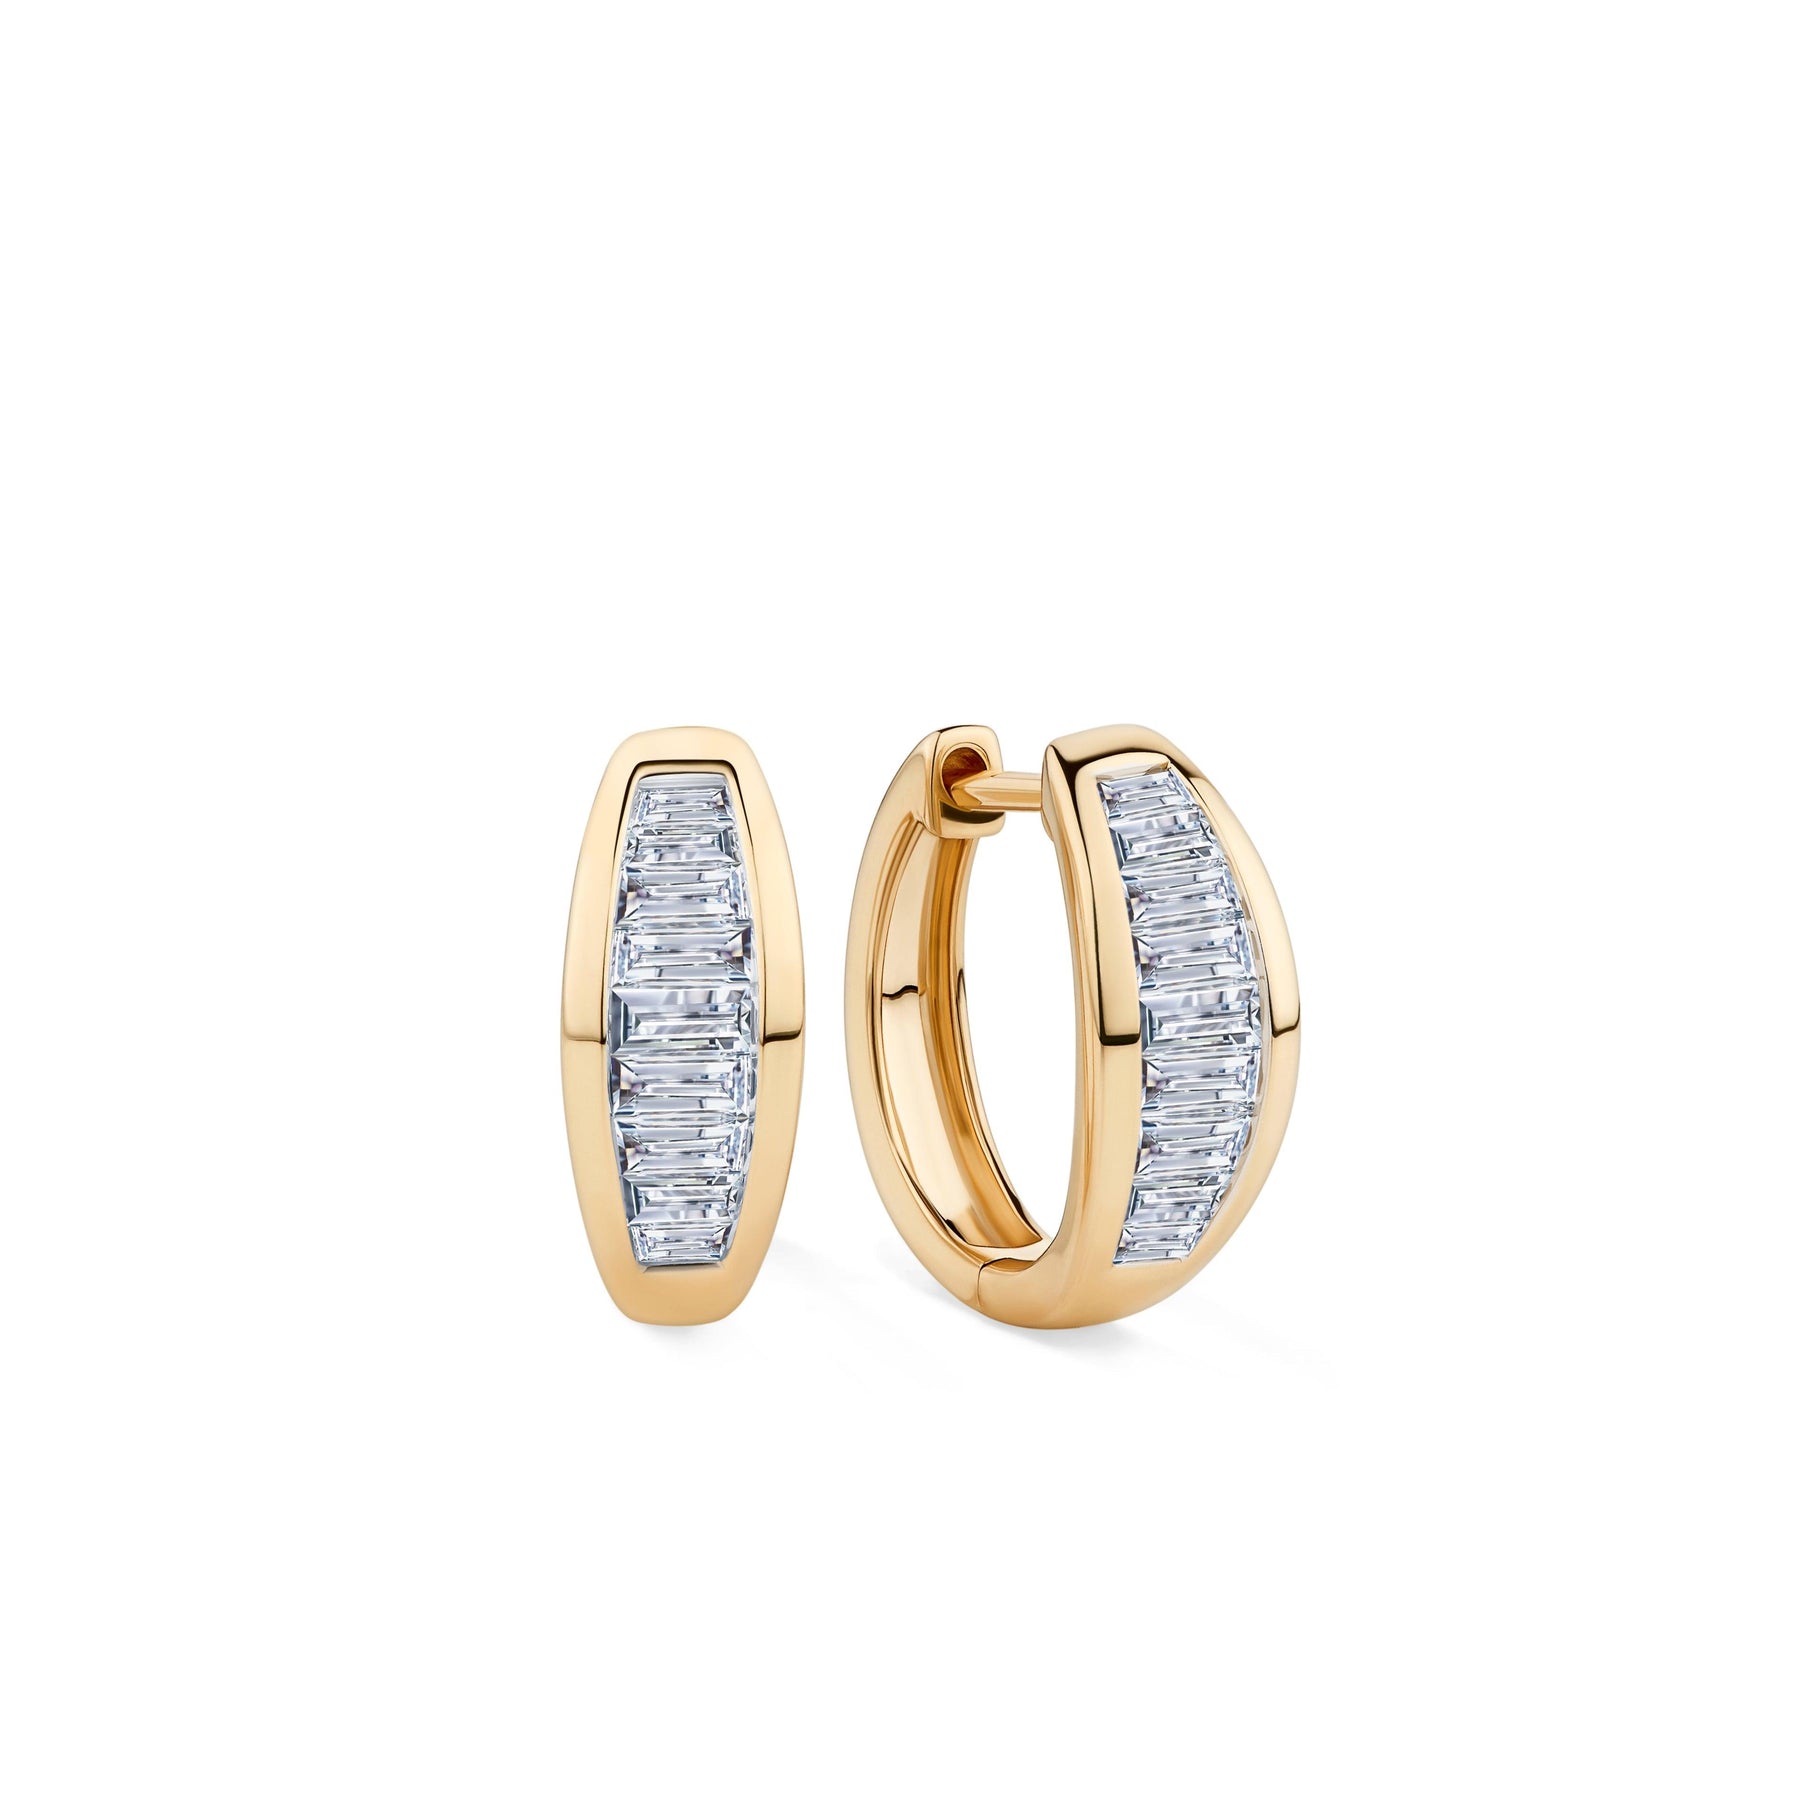 0.50ct TW Diamond Baguette Earrings in 9ct Yellow Gold - Wallace Bishop